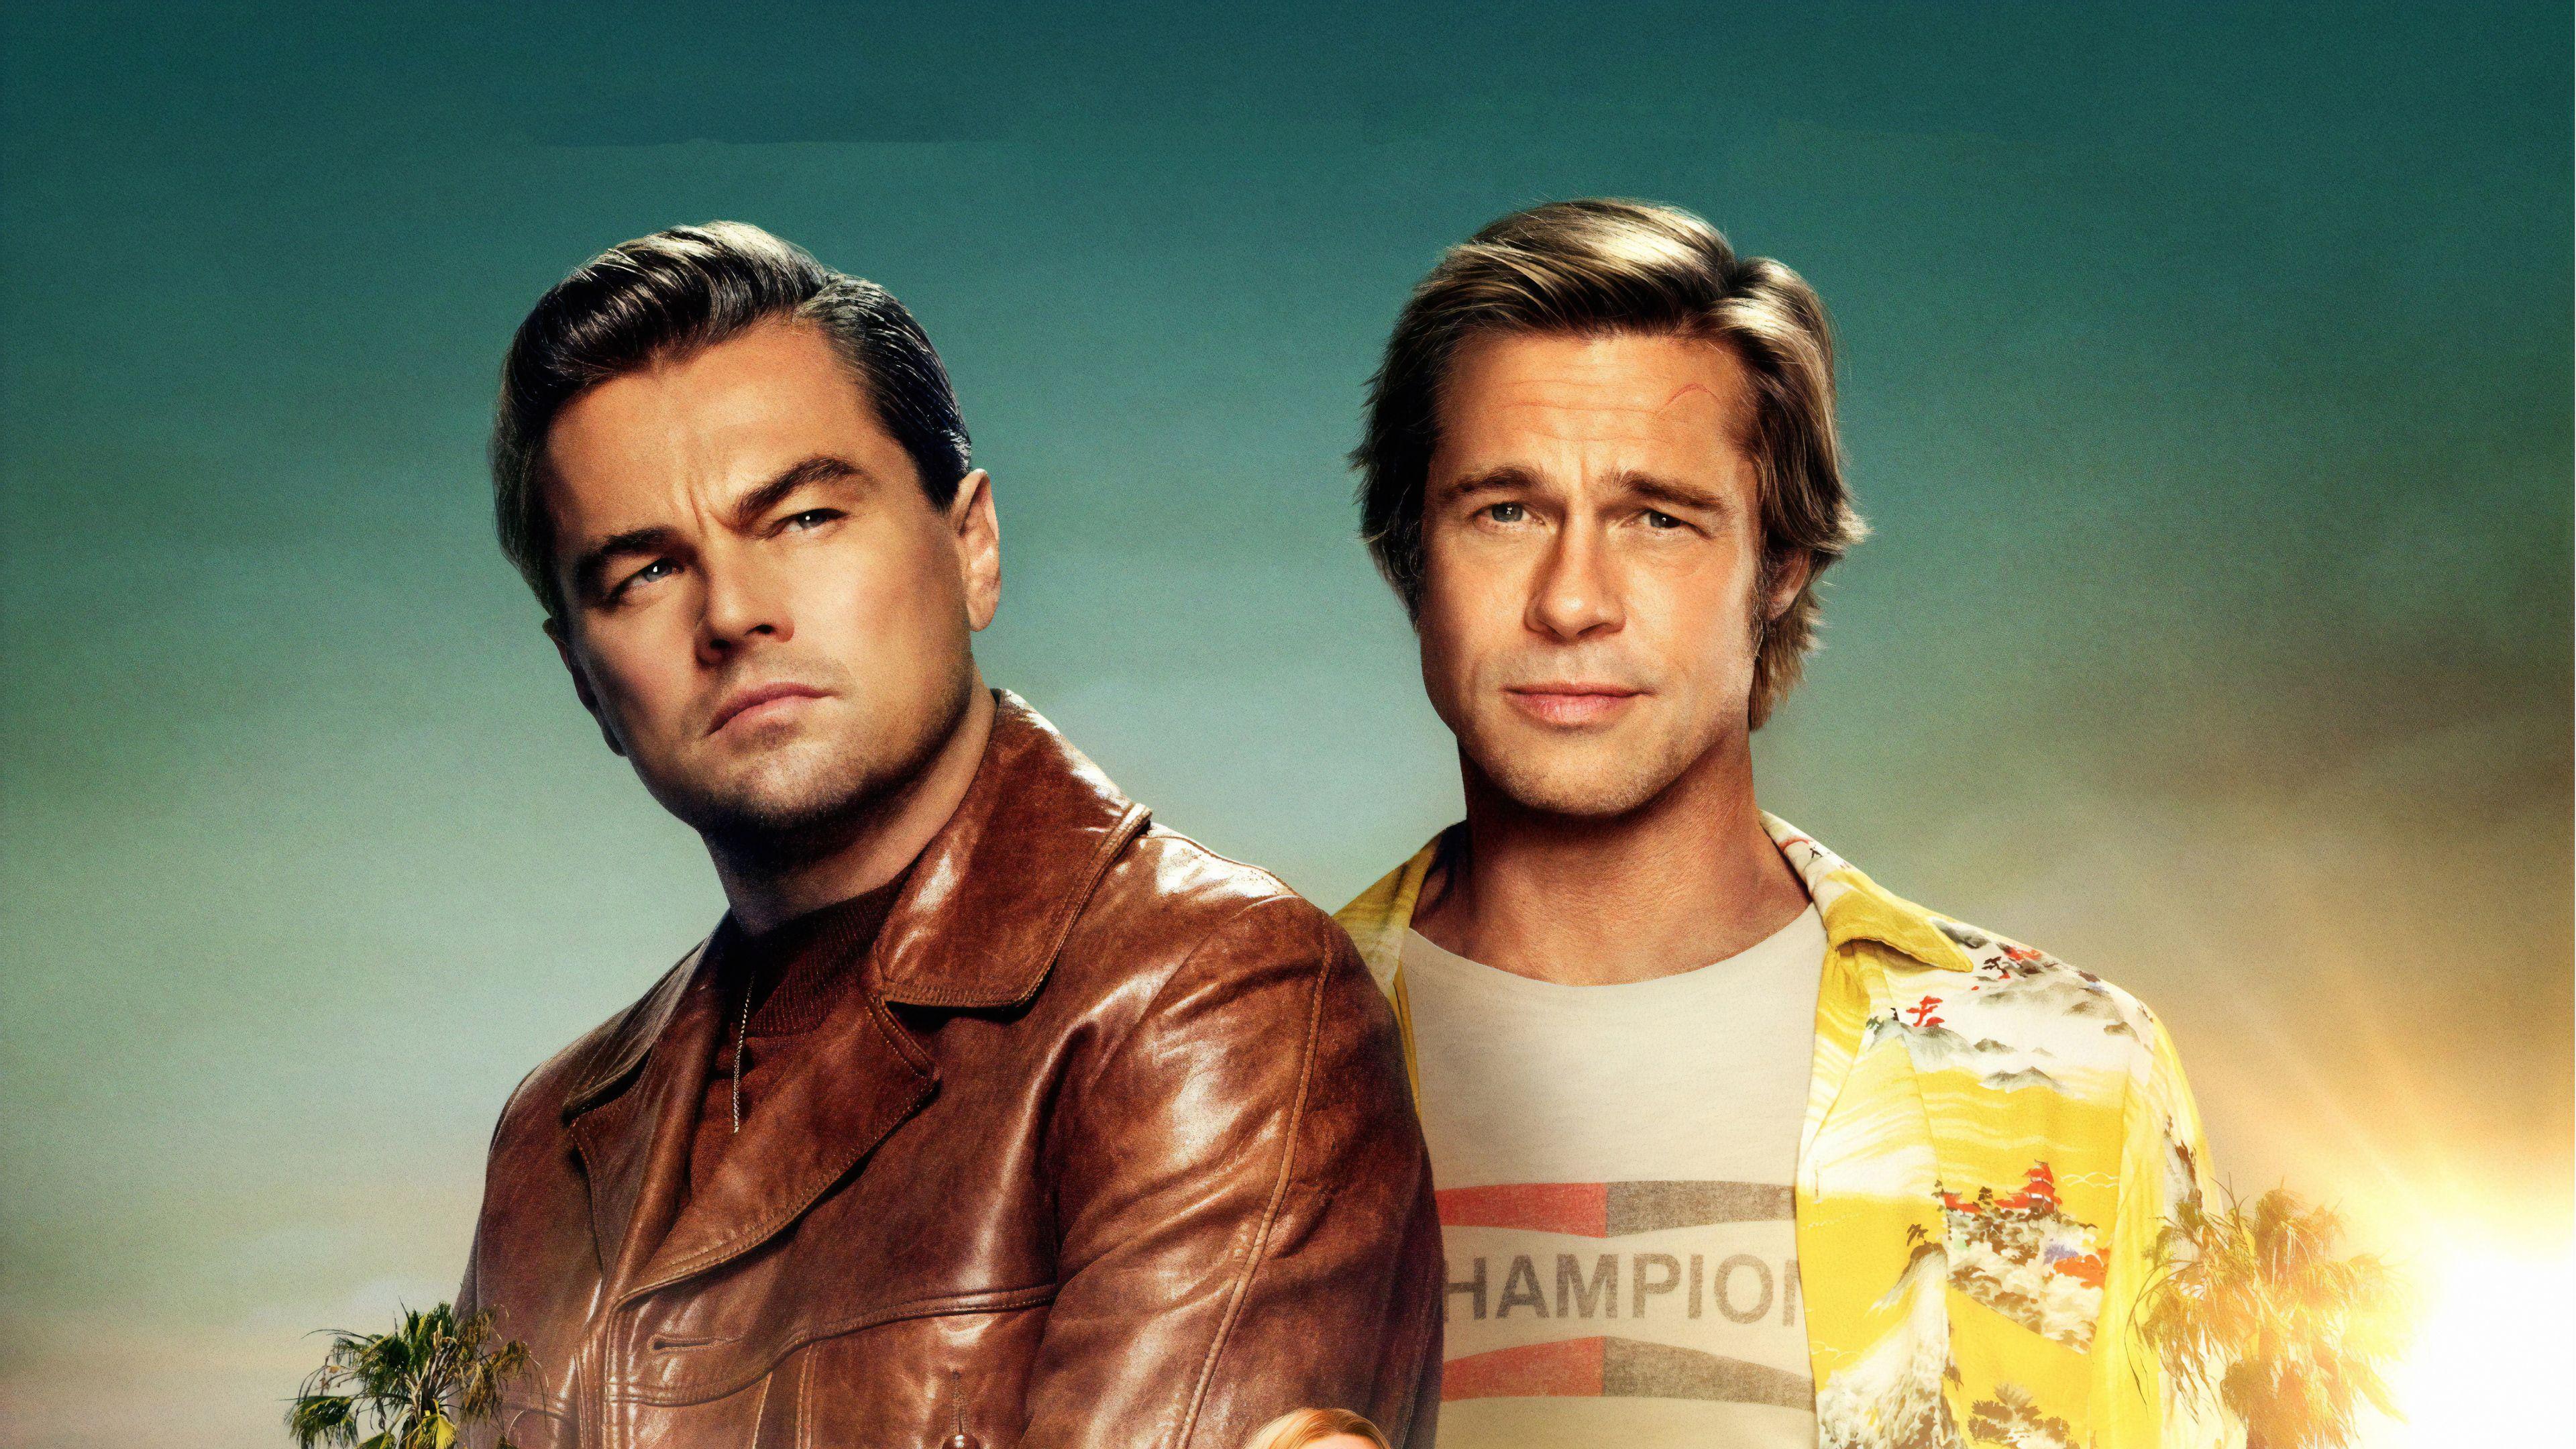 Once Upon A Time In Hollywood Wallpaper Iphone - Epektase